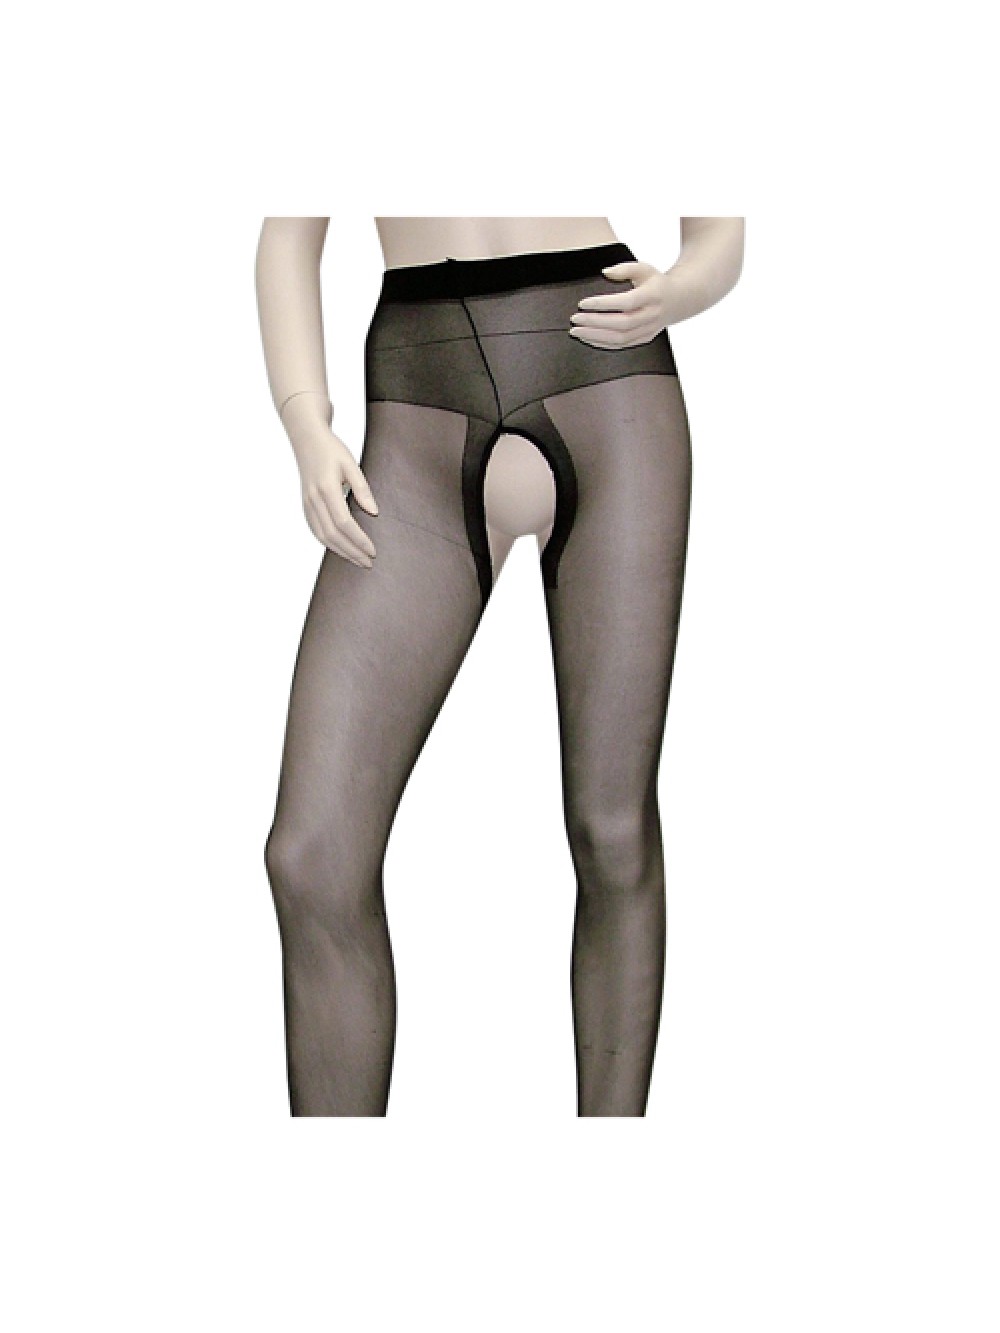 Crotchless Tights black 4024144044306